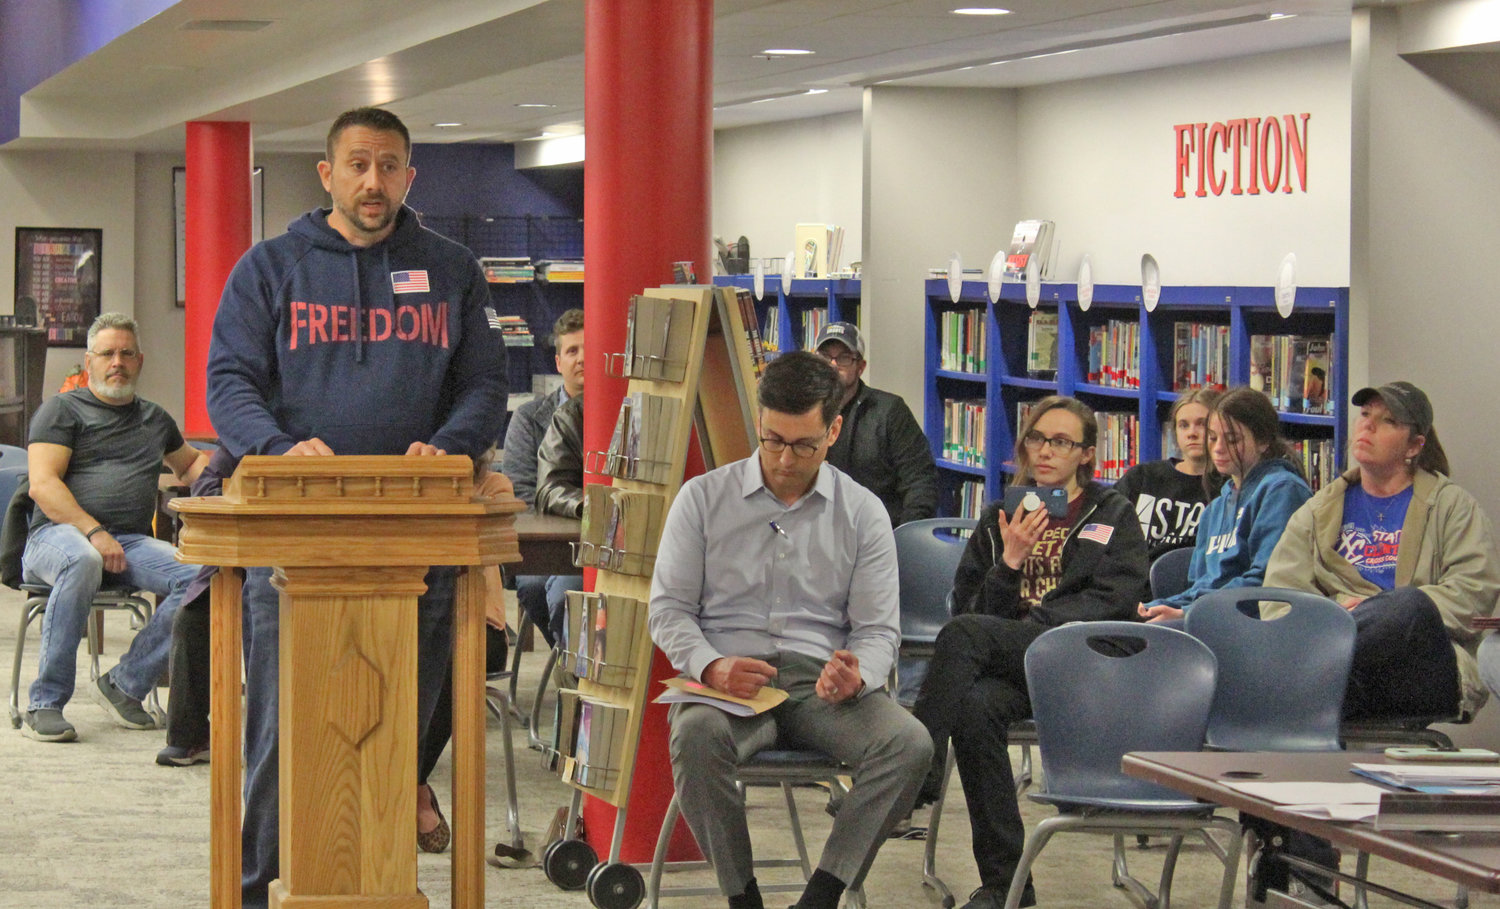 MICHAEL ROSIERE spoke to the school board regarding mask mandate concerns at the most recent meeting held on November 22 .